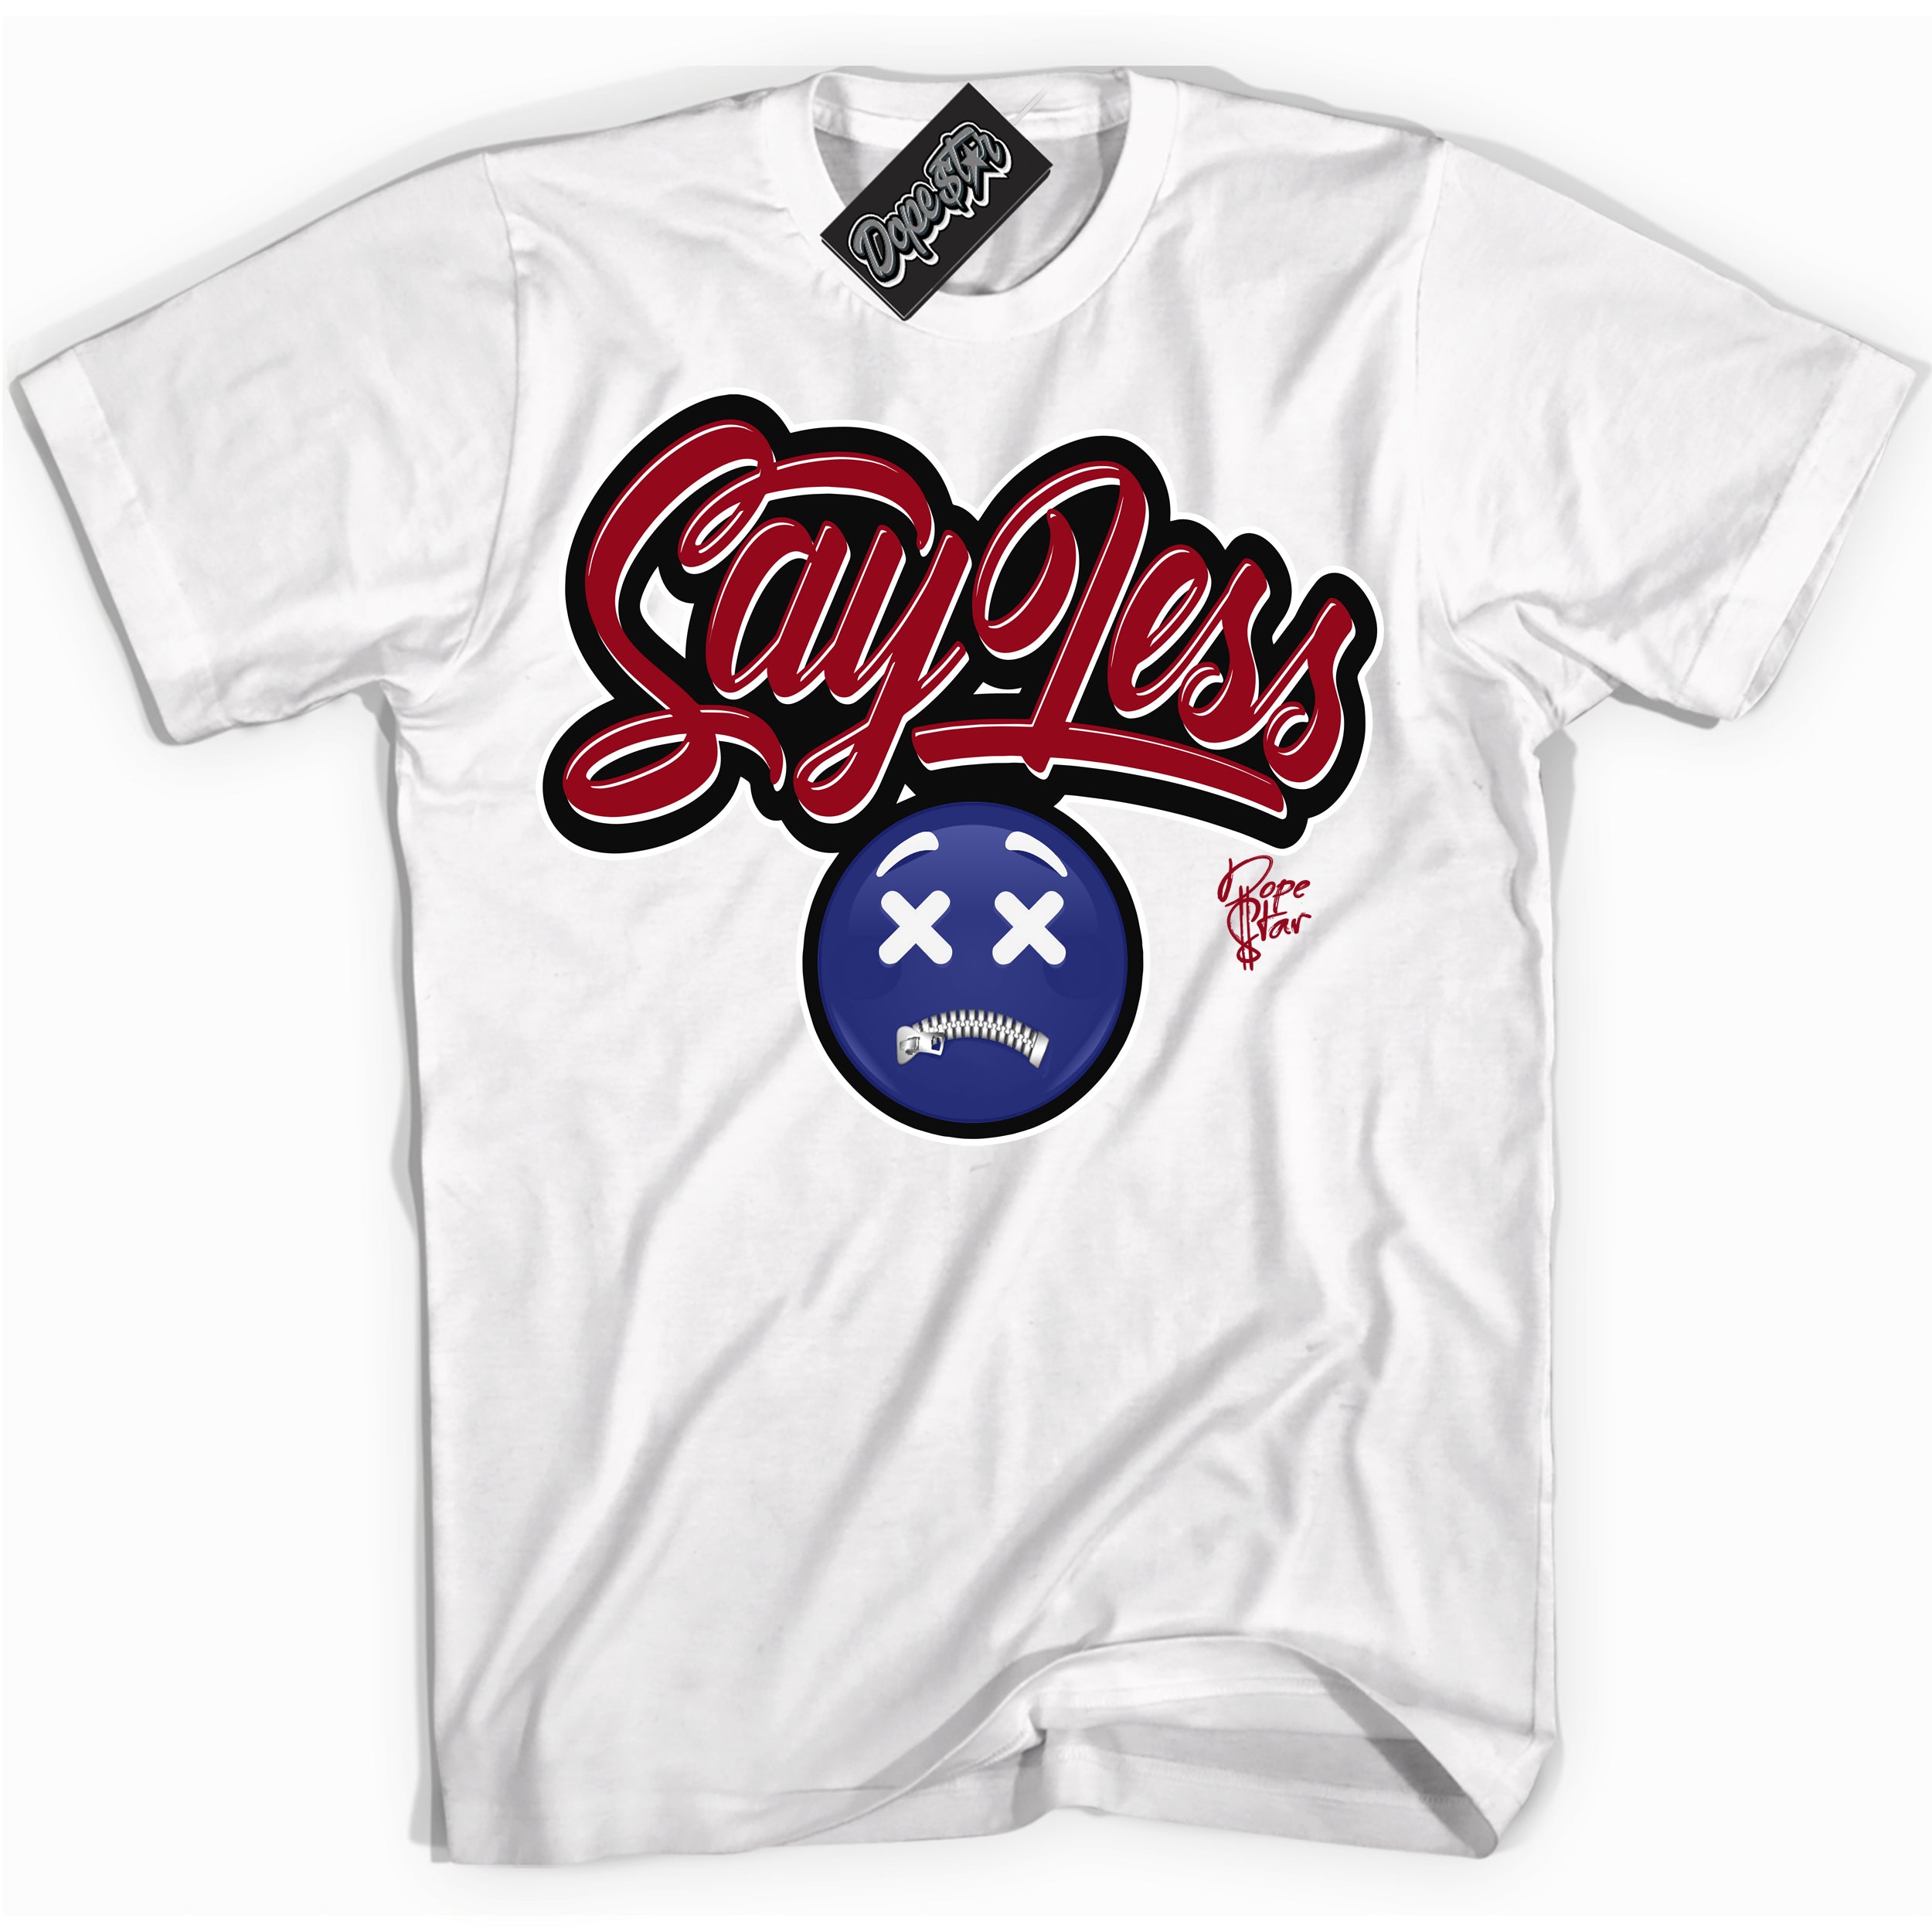 Cool White Shirt with “ Say Less ” design that perfectly matches Playoffs 8s Sneakers.